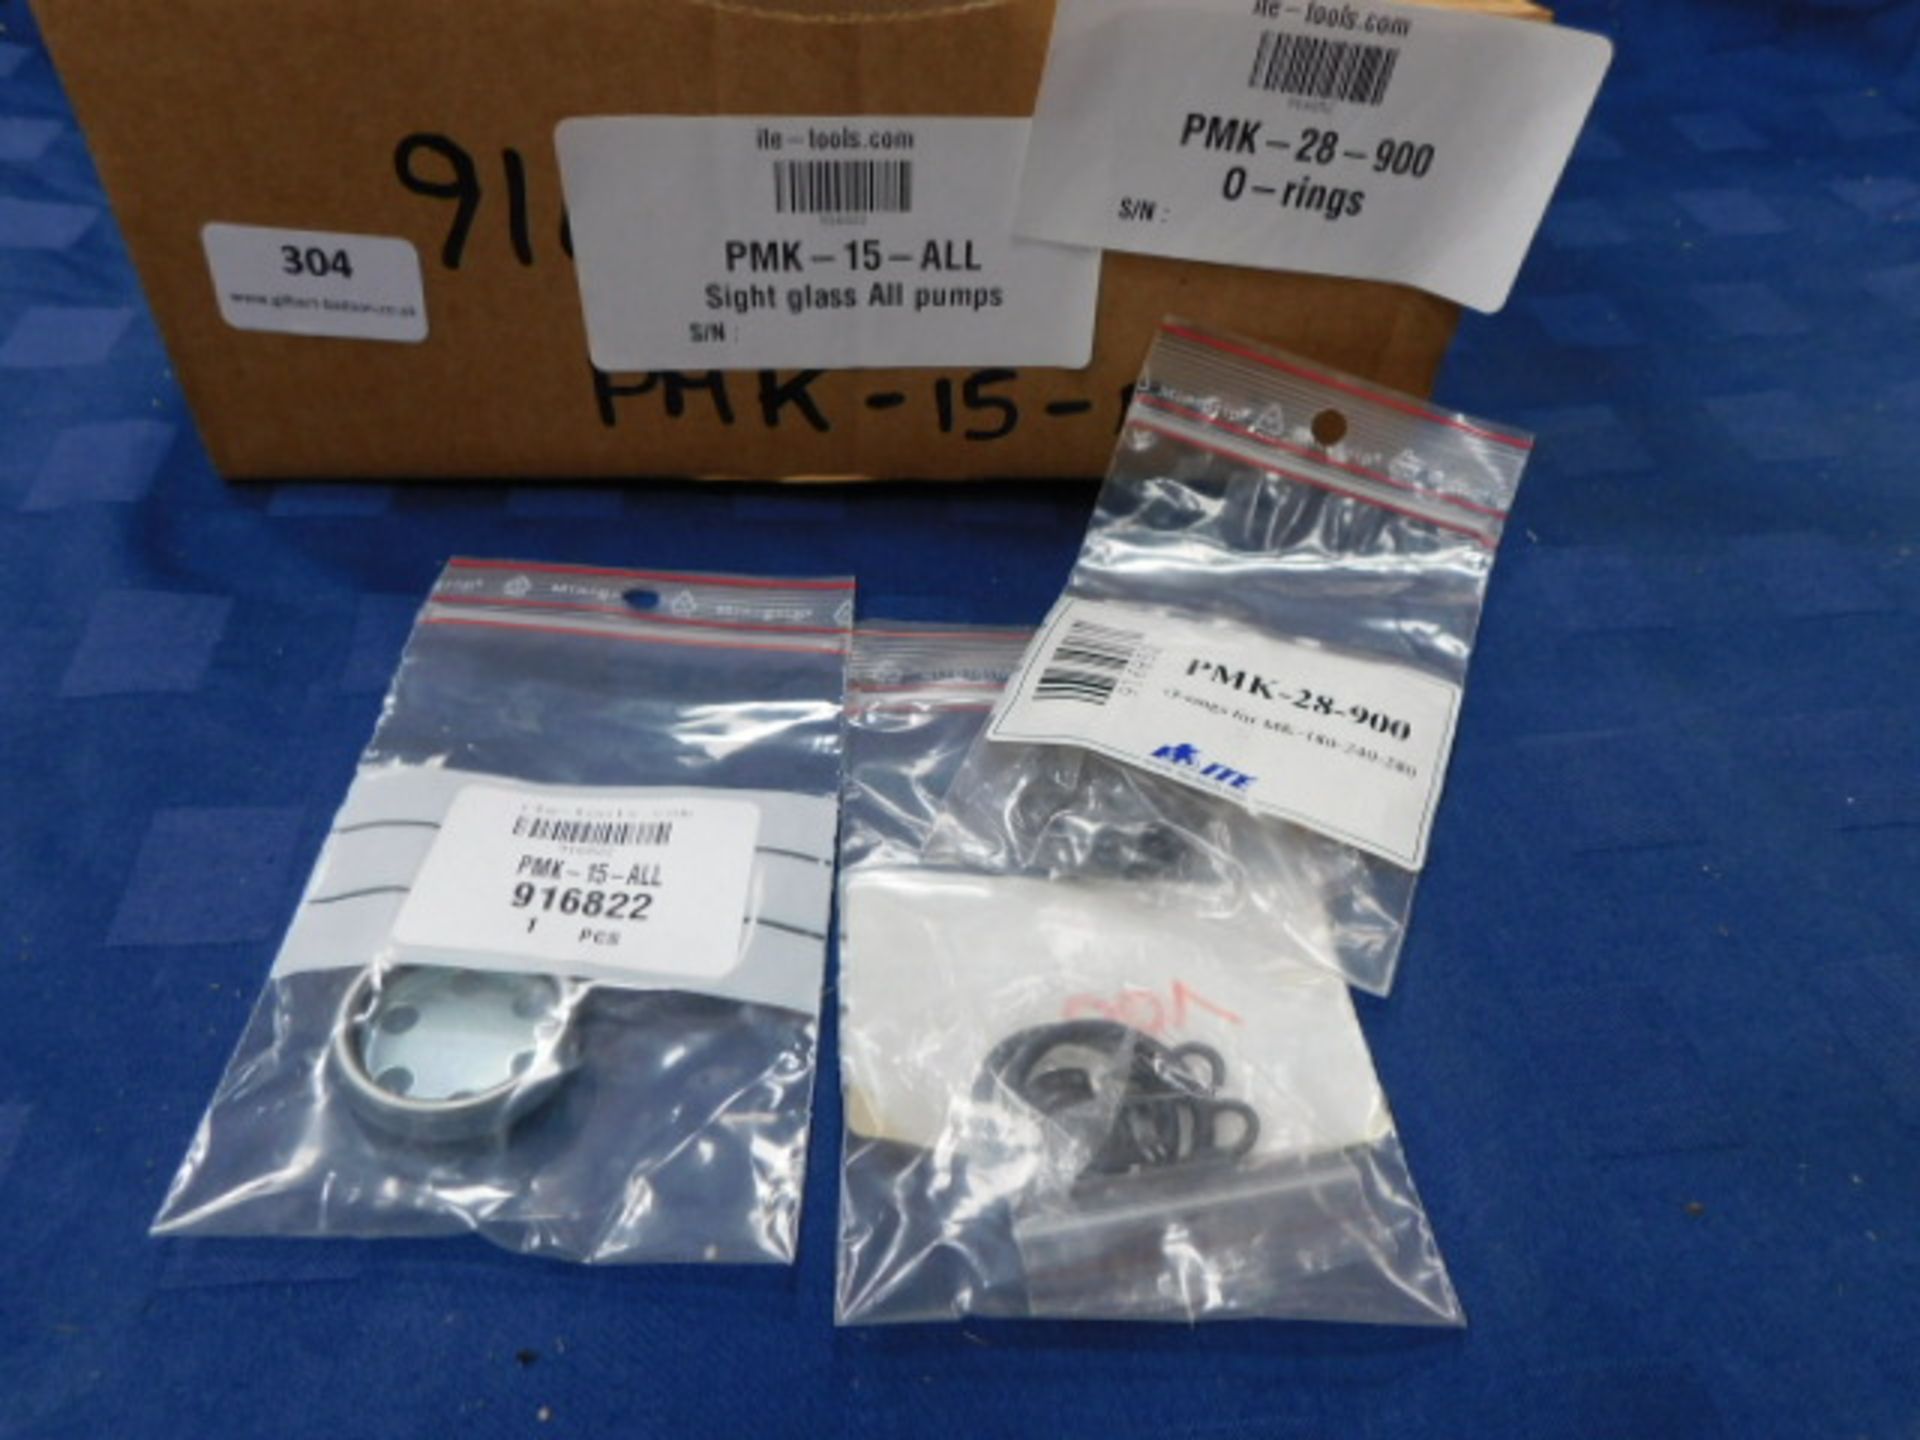 * 3x PMK-15-ALL Sight glass all pumps & 2 x PMK-28-900 O-rings for MK-180-240-280